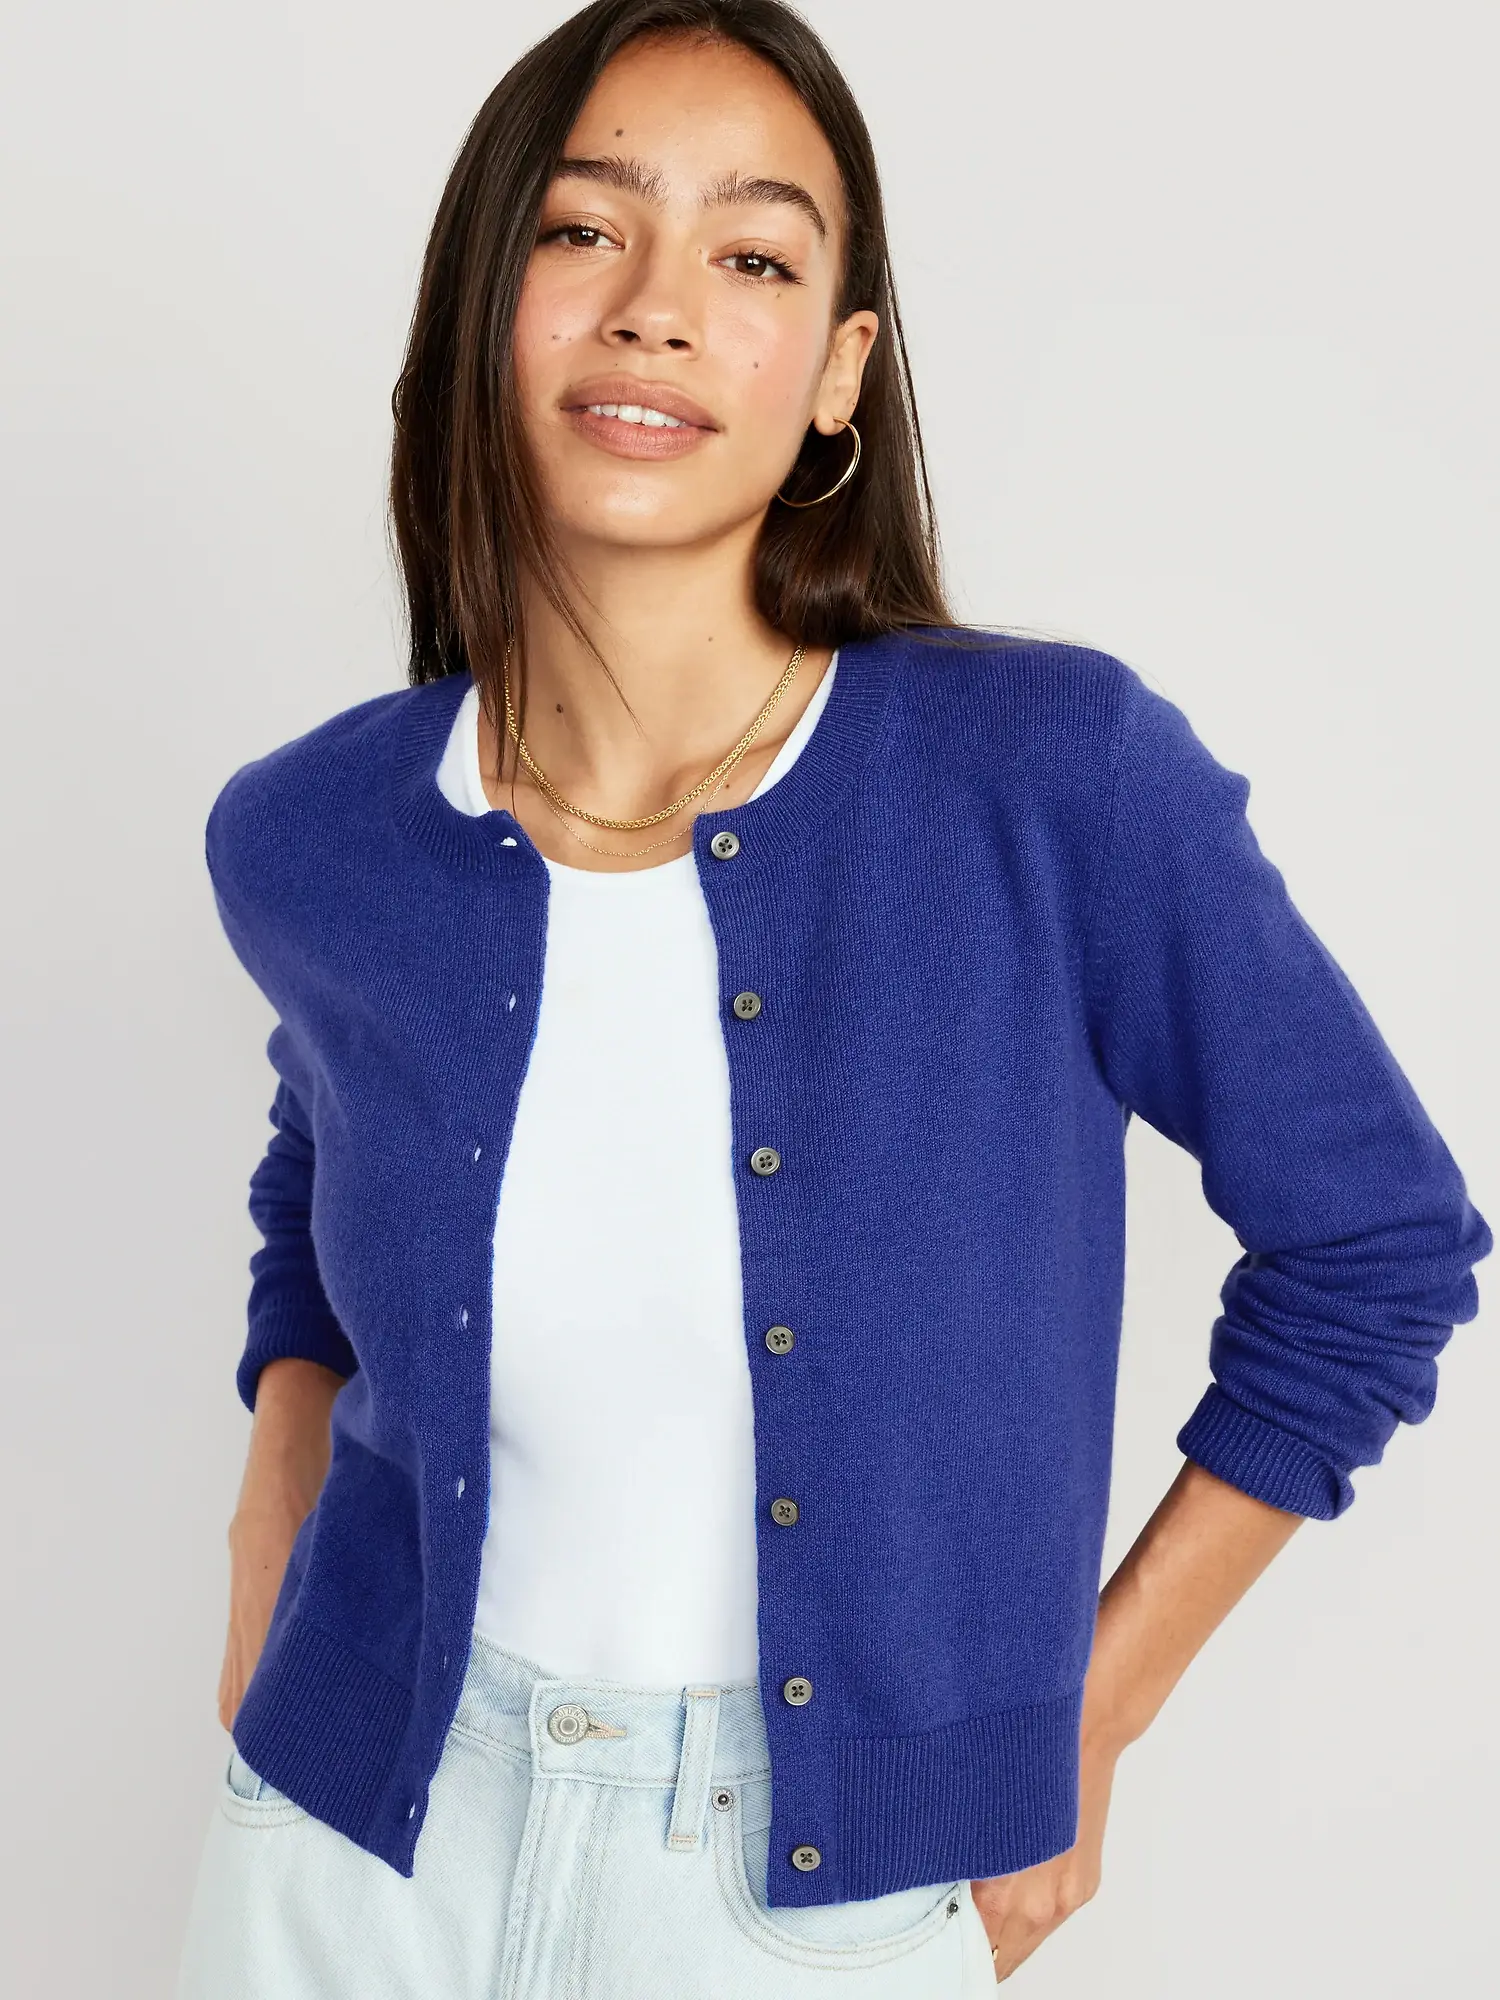 Old Navy SoSoft Cropped Cardigan Sweater for Women blue. 1